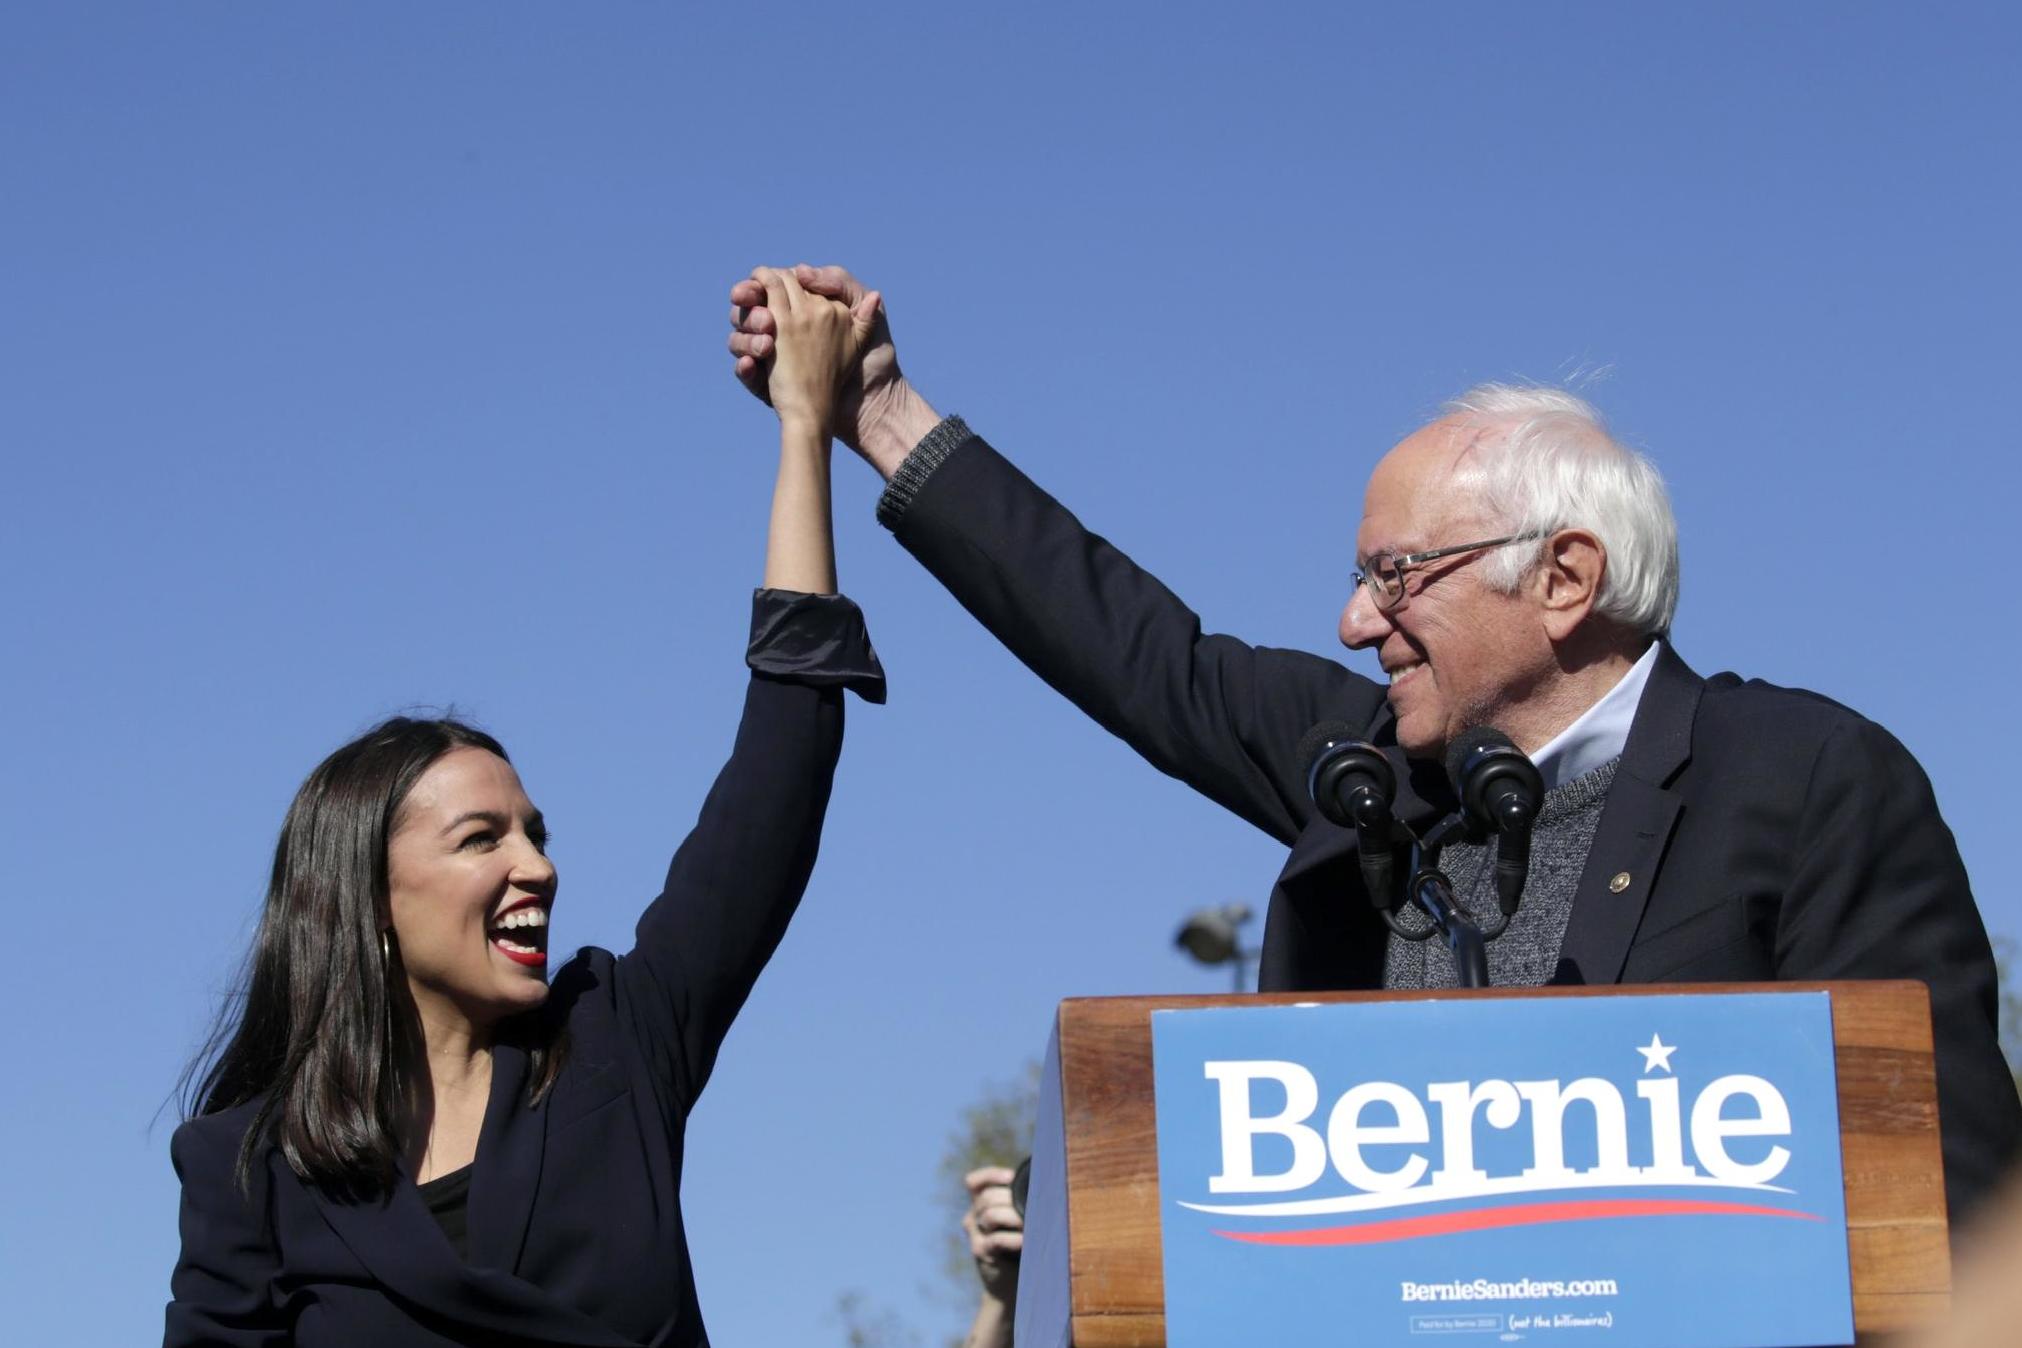 Alexandria Ocasio-Cortez has thrown her support behind 2020 hopeful Bernie Sanders after reportedly debating for months on whether to endorse the Vermont senator or Elizabeth Warren.